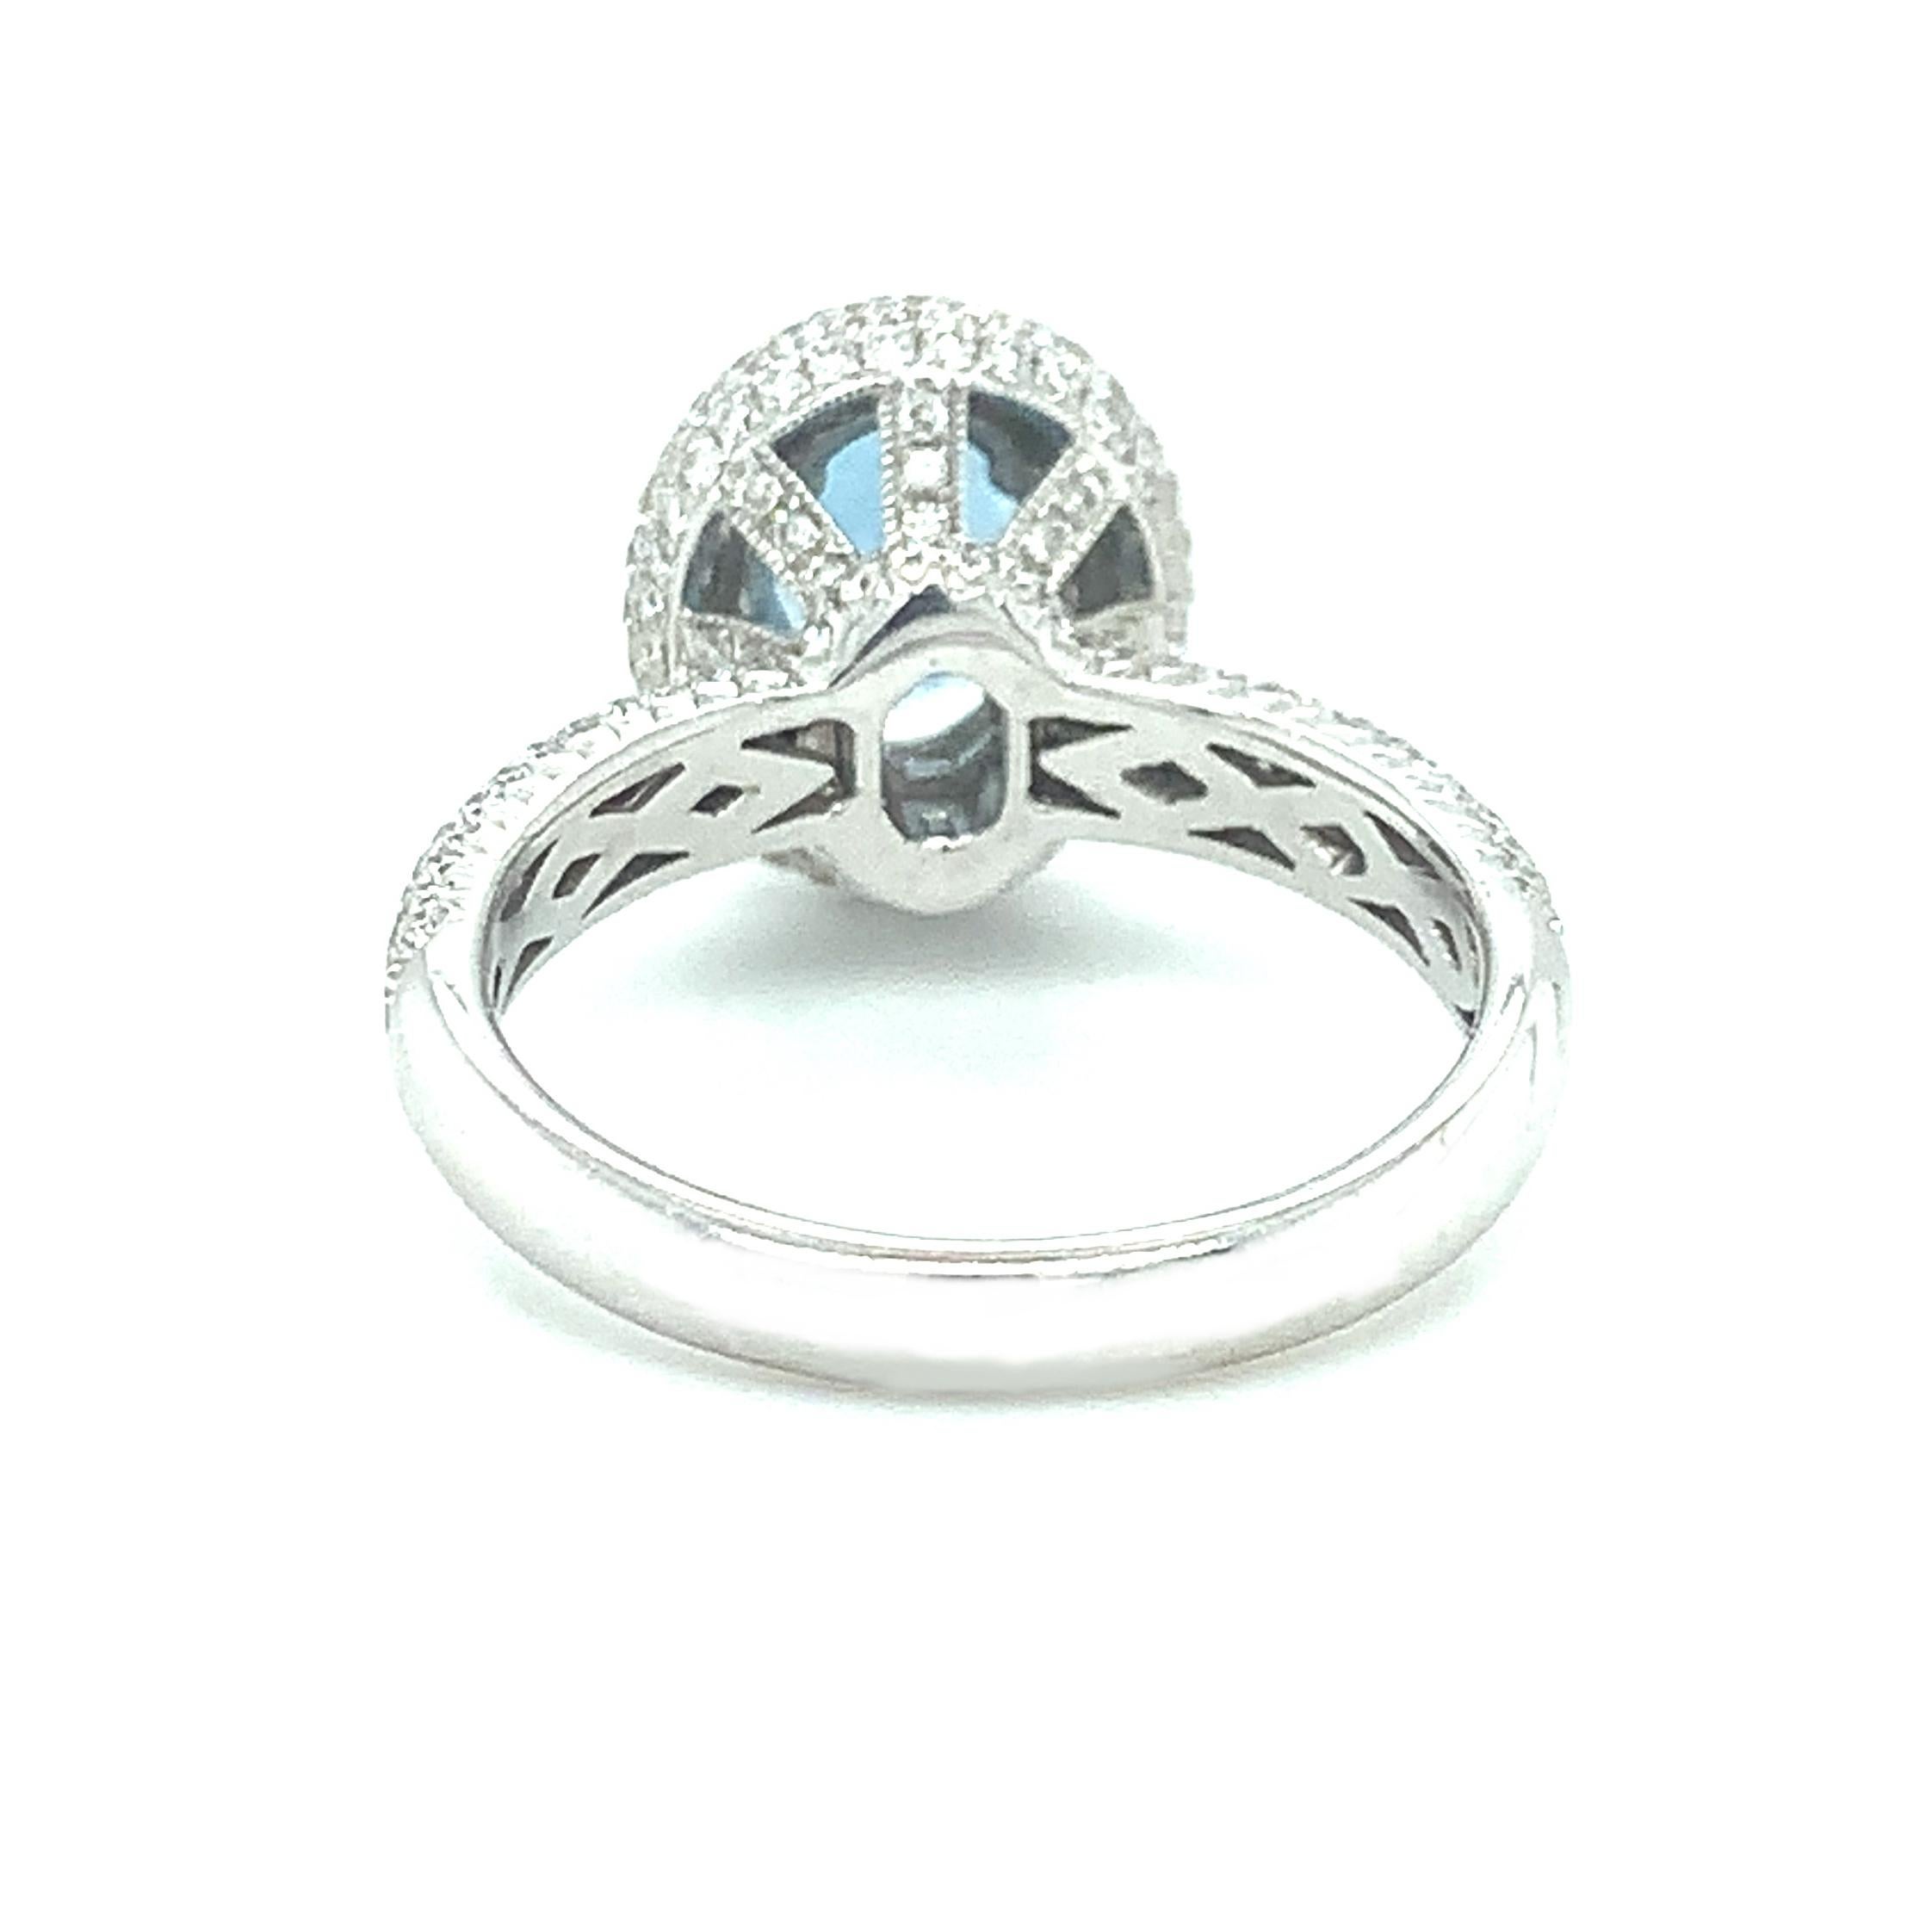 Oval Cut Aquamarine and Diamond Double Halo Engagement Ring in 18k White Gold